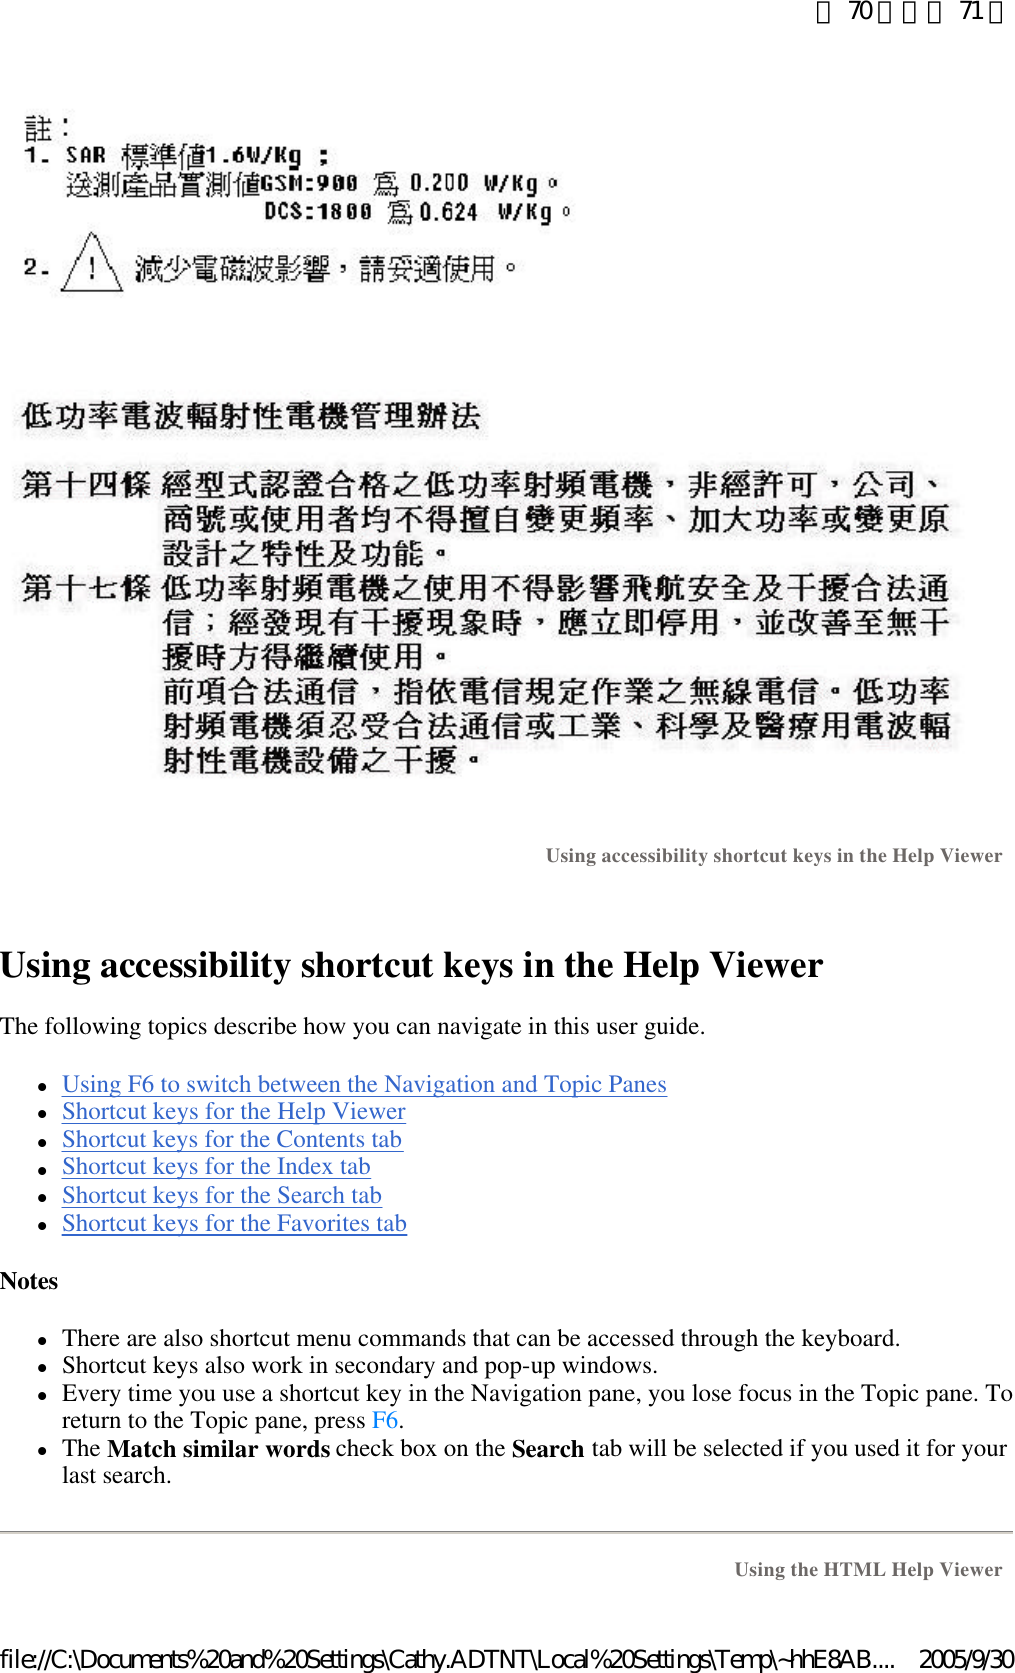    Using accessibility shortcut keys in the Help Viewer  The following topics describe how you can navigate in this user guide.  lUsing F6 to switch between the Navigation and Topic Panes  lShortcut keys for the Help Viewer  lShortcut keys for the Contents tab  lShortcut keys for the Index tab  lShortcut keys for the Search tab  lShortcut keys for the Favorites tab  Notes  lThere are also shortcut menu commands that can be accessed through the keyboard.  lShortcut keys also work in secondary and pop-up windows.  lEvery time you use a shortcut key in the Navigation pane, you lose focus in the Topic pane. To return to the Topic pane, press F6.  lThe Match similar words check box on the Search tab will be selected if you used it for your last search.  Using accessibility shortcut keys in the Help Viewer   Using the HTML Help Viewer 第 70 頁，共 71 頁2005/9/30file://C:\Documents%20and%20Settings\Cathy.ADTNT\Local%20Settings\Temp\~hhE8AB....